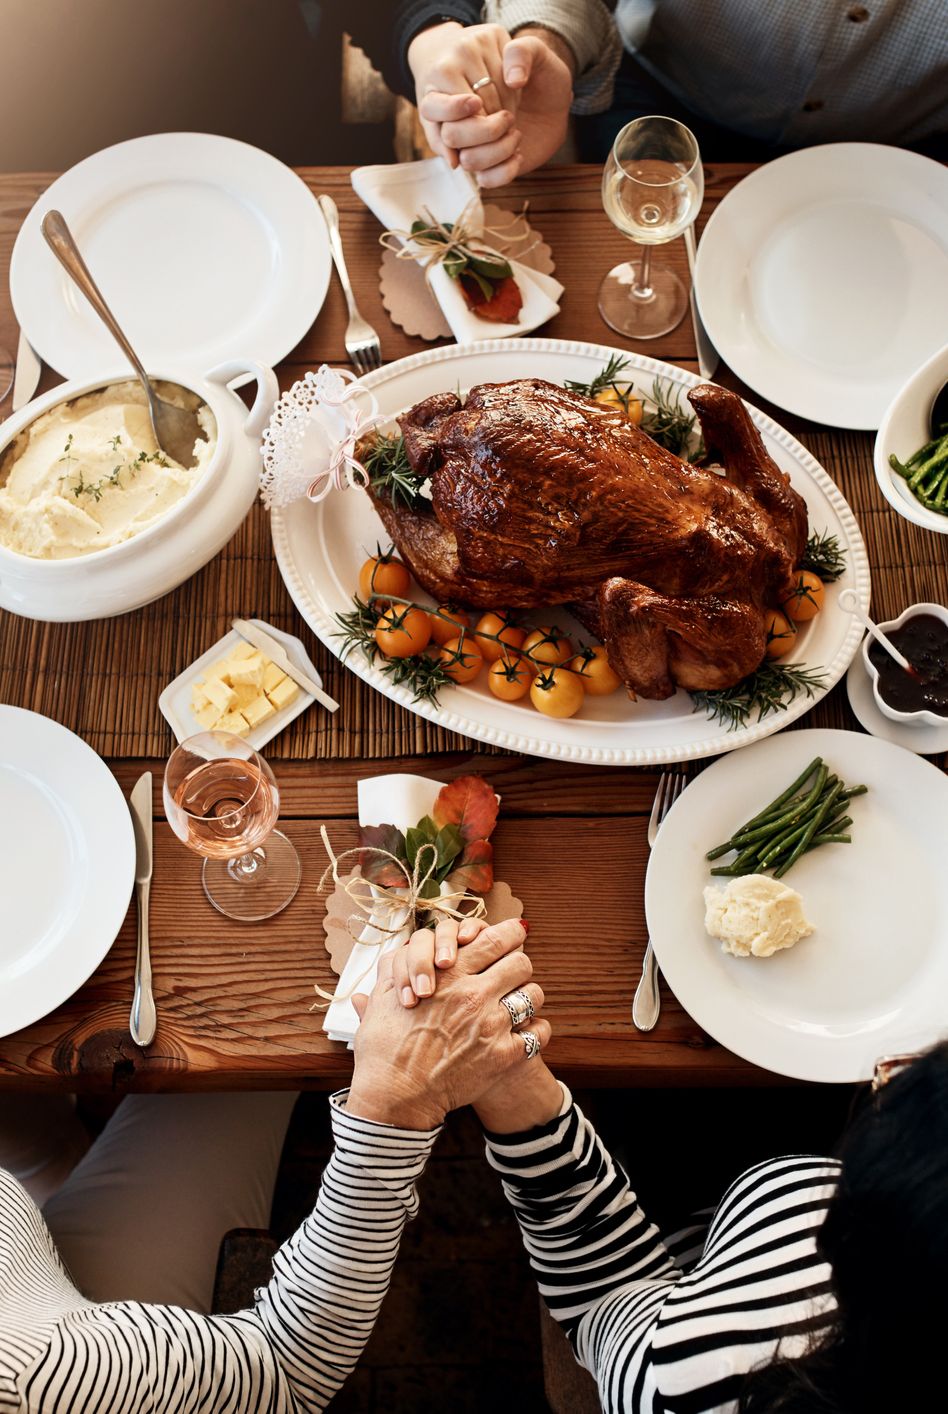 39 Best Thanksgiving Traditions for 2022 - Top Traditions for Thanksgiving